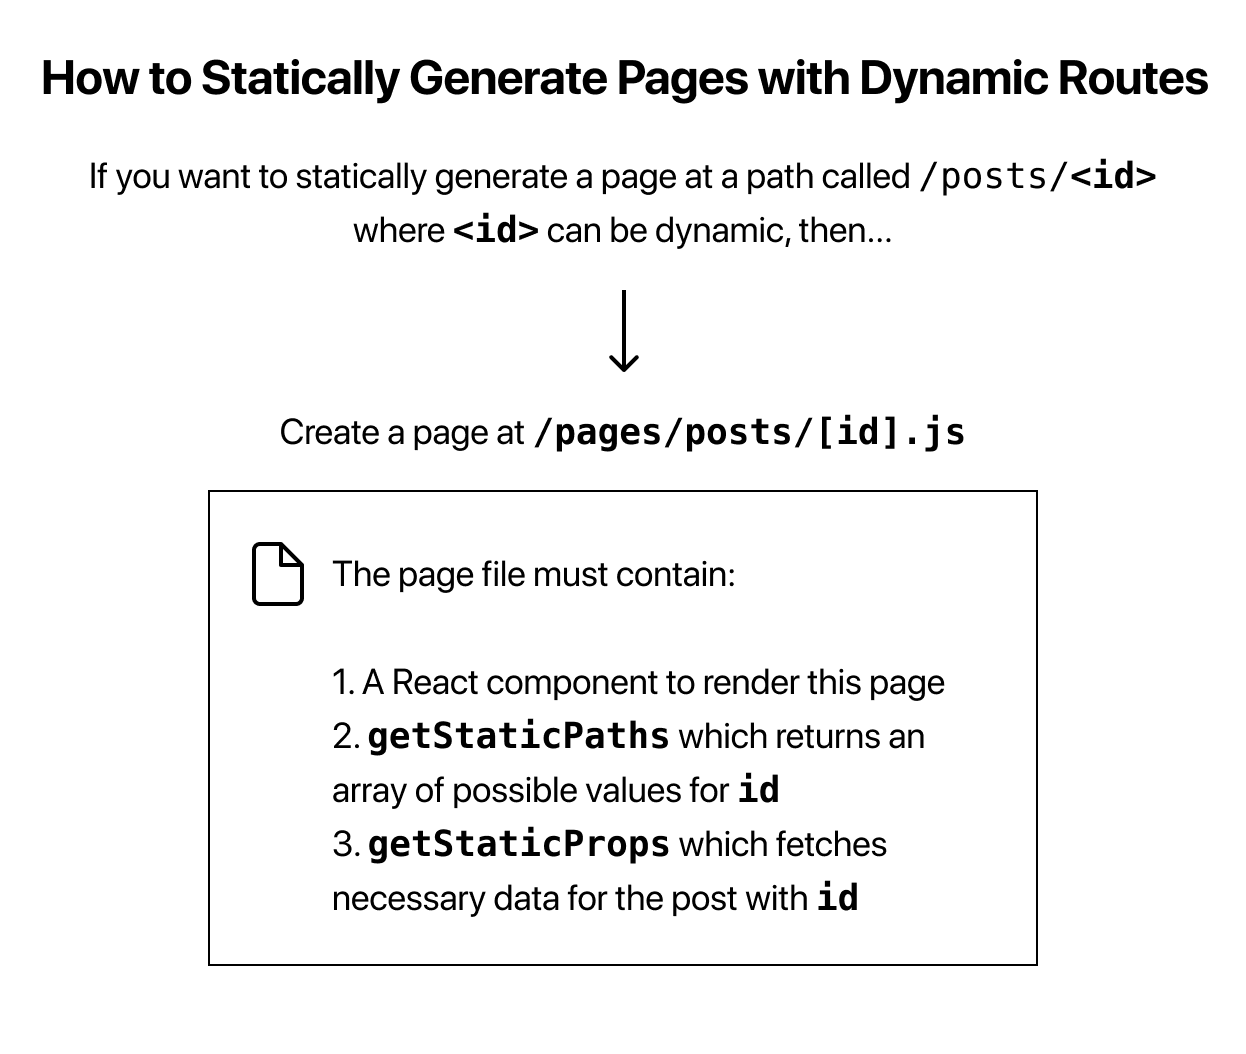 statically generate dynamic routes